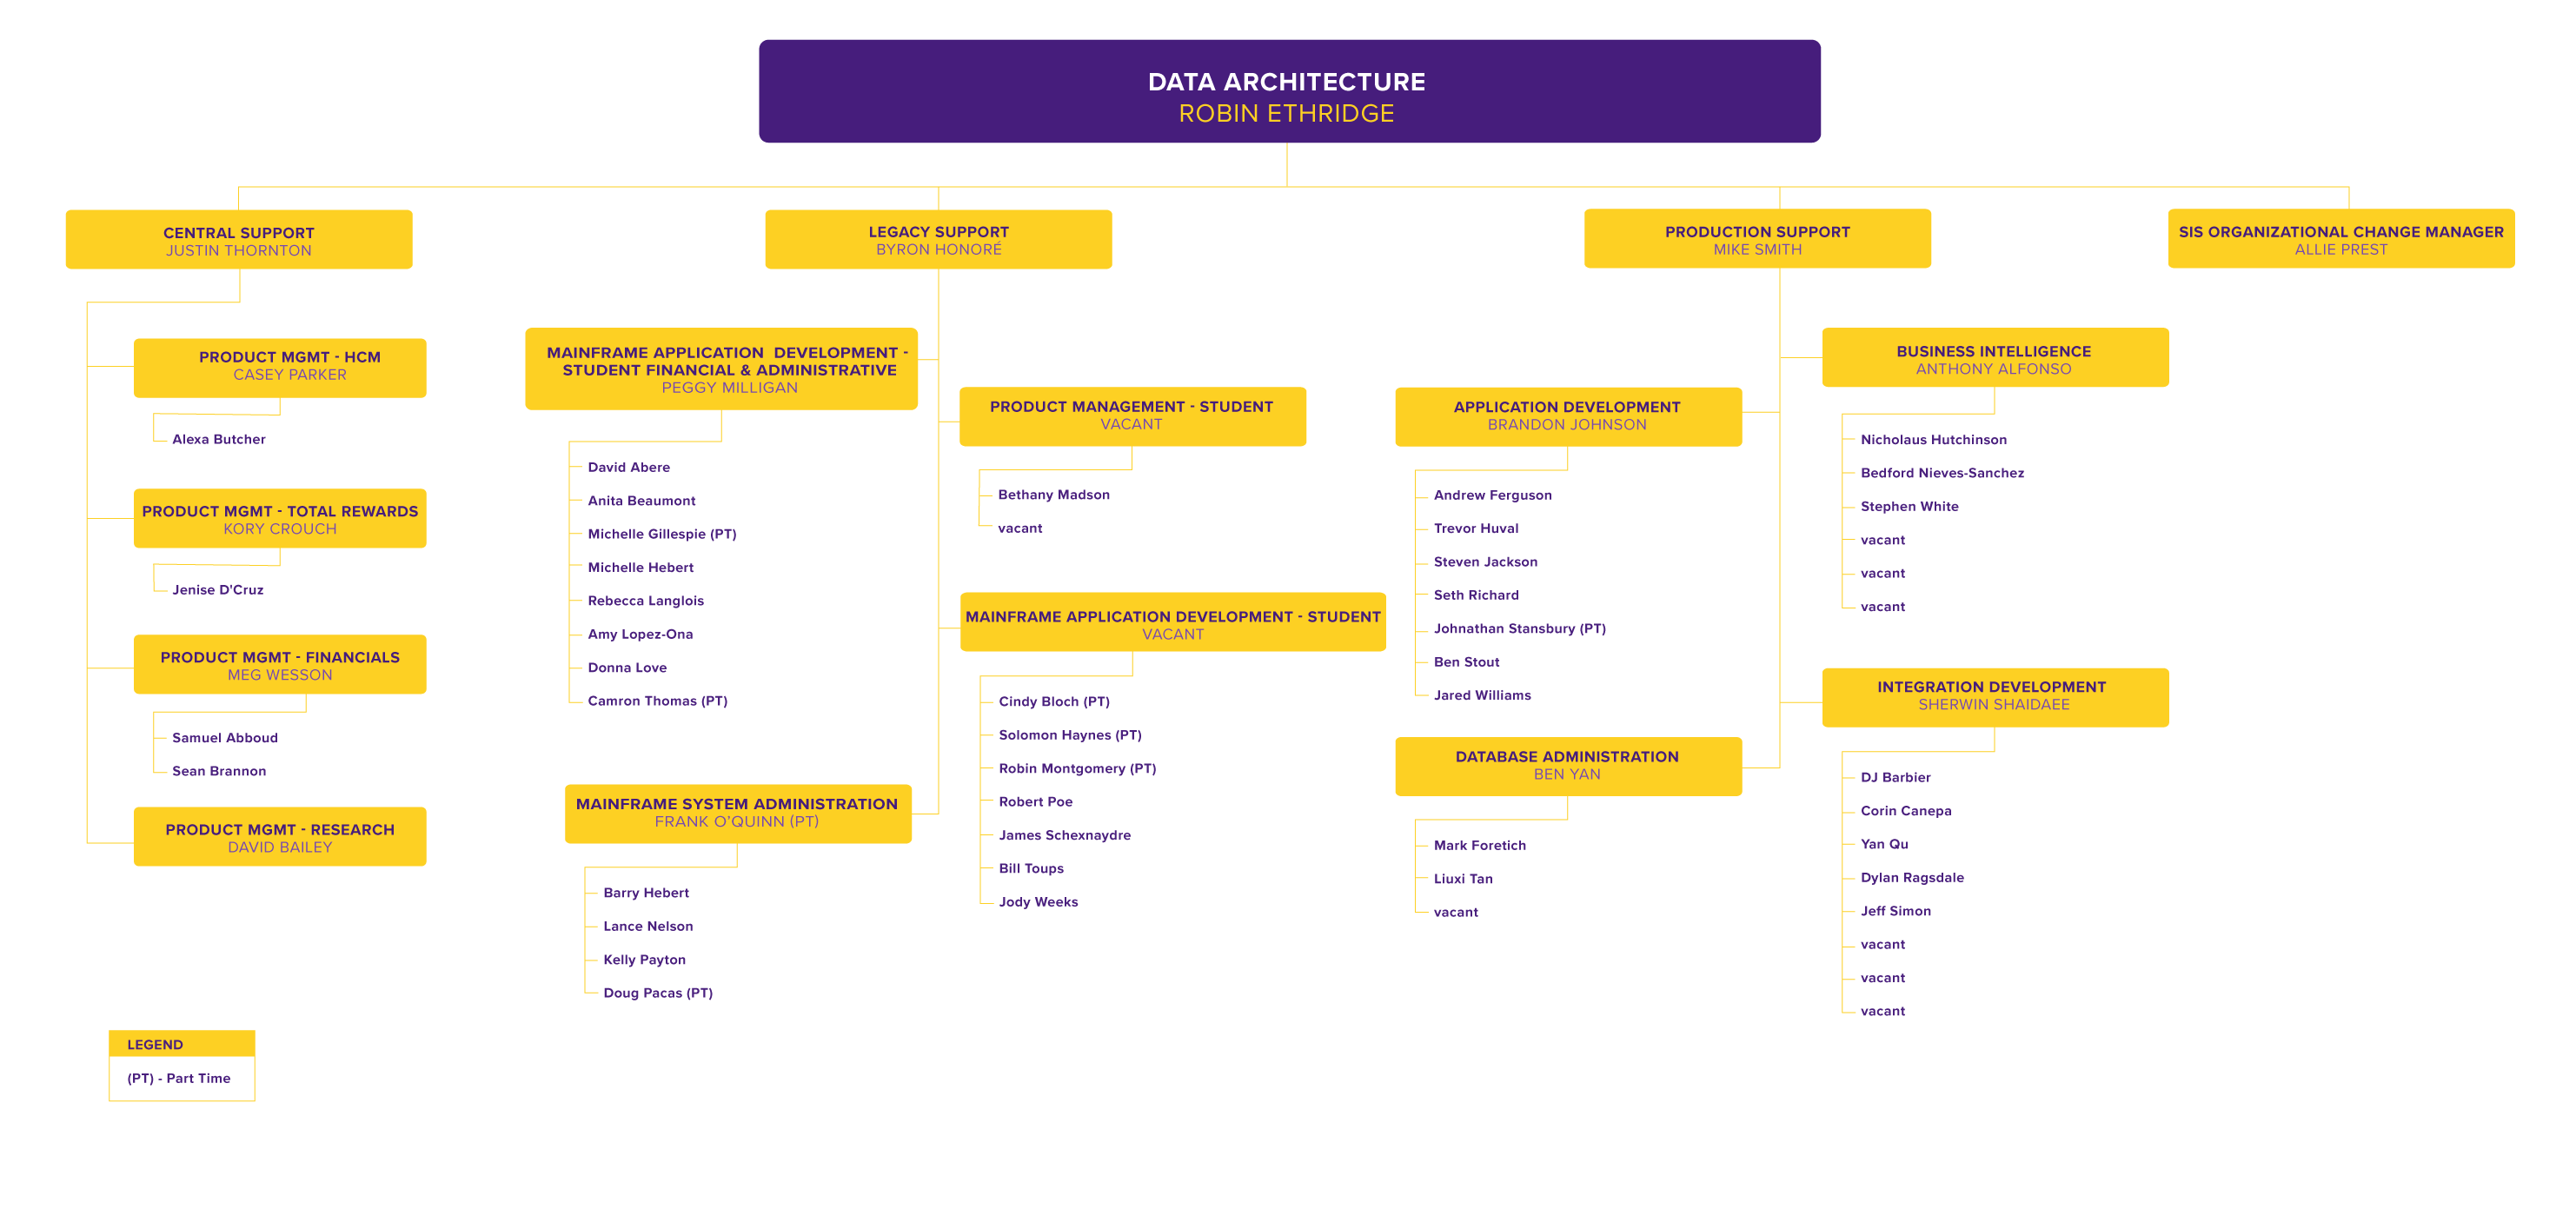 Data Architecture Org Chart, detailed in text below